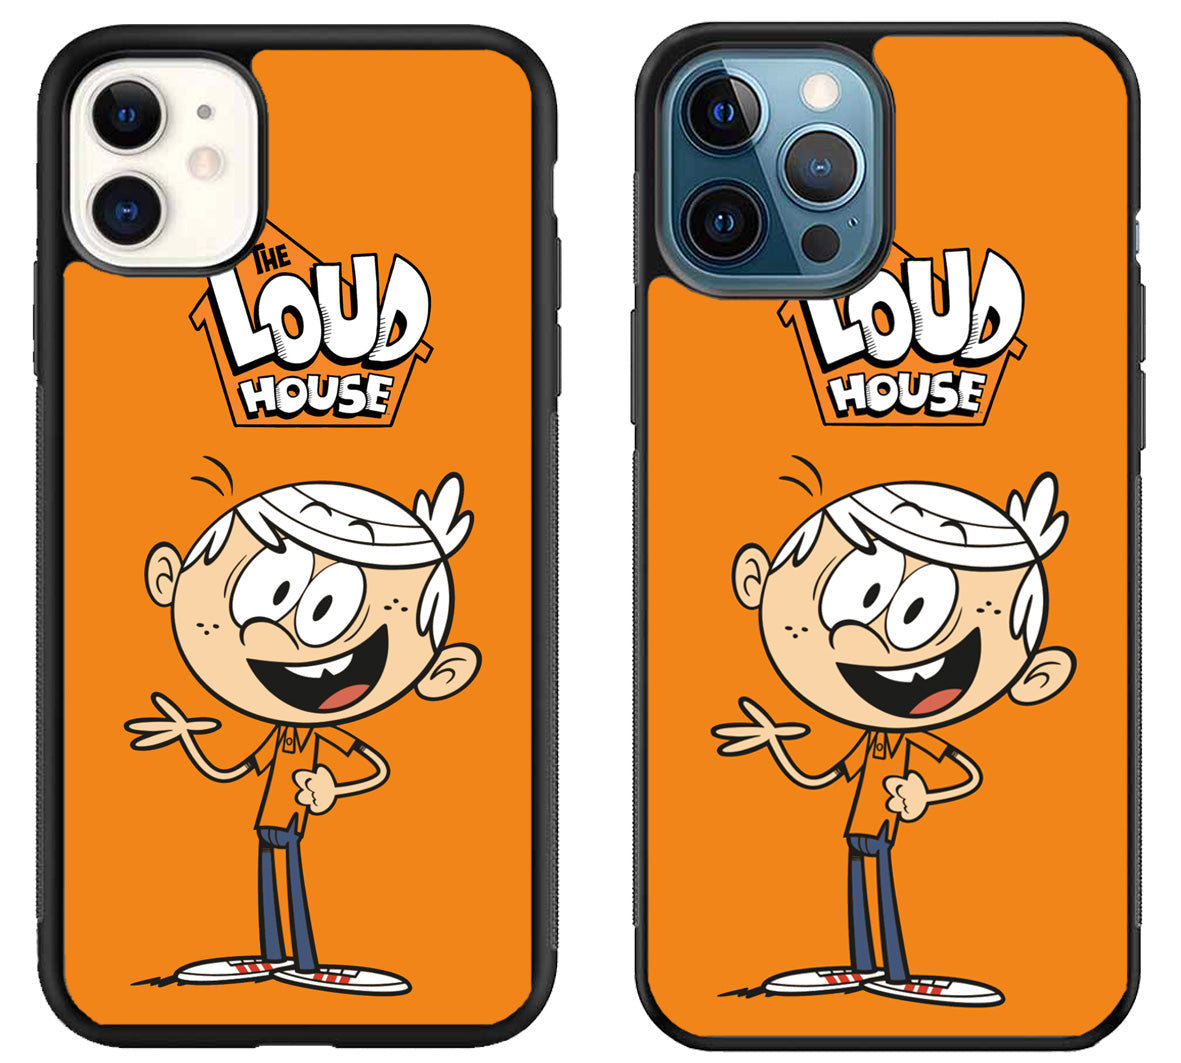 The loud house Lincoln Loud iPhone 11 | 11 Pro | 11 Pro Max Case